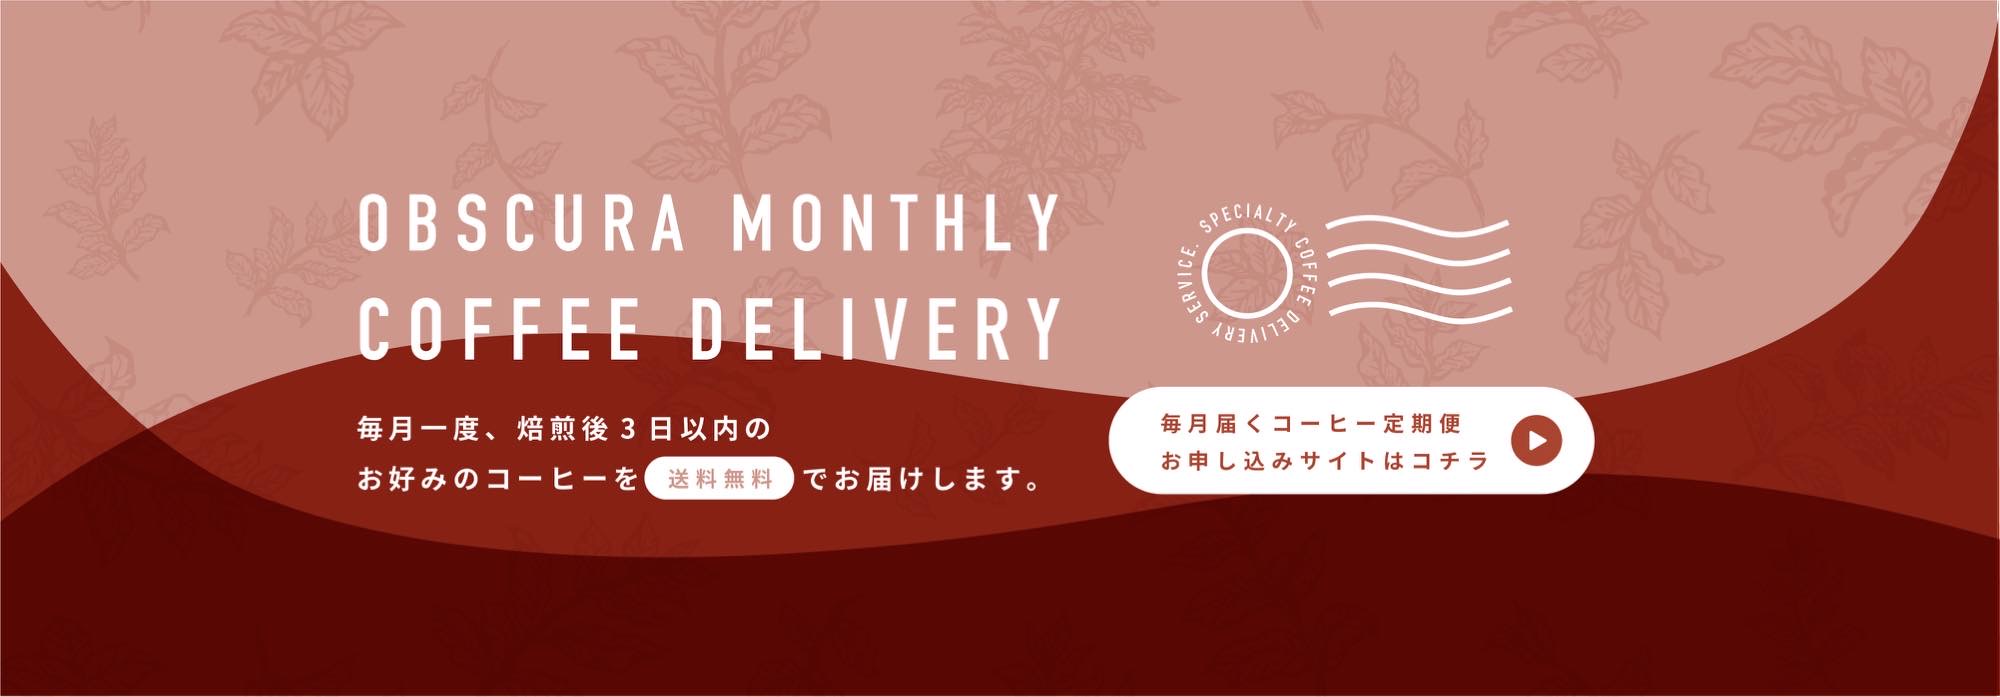 OBSCURA MONTHLY COFFEE DELIVERY